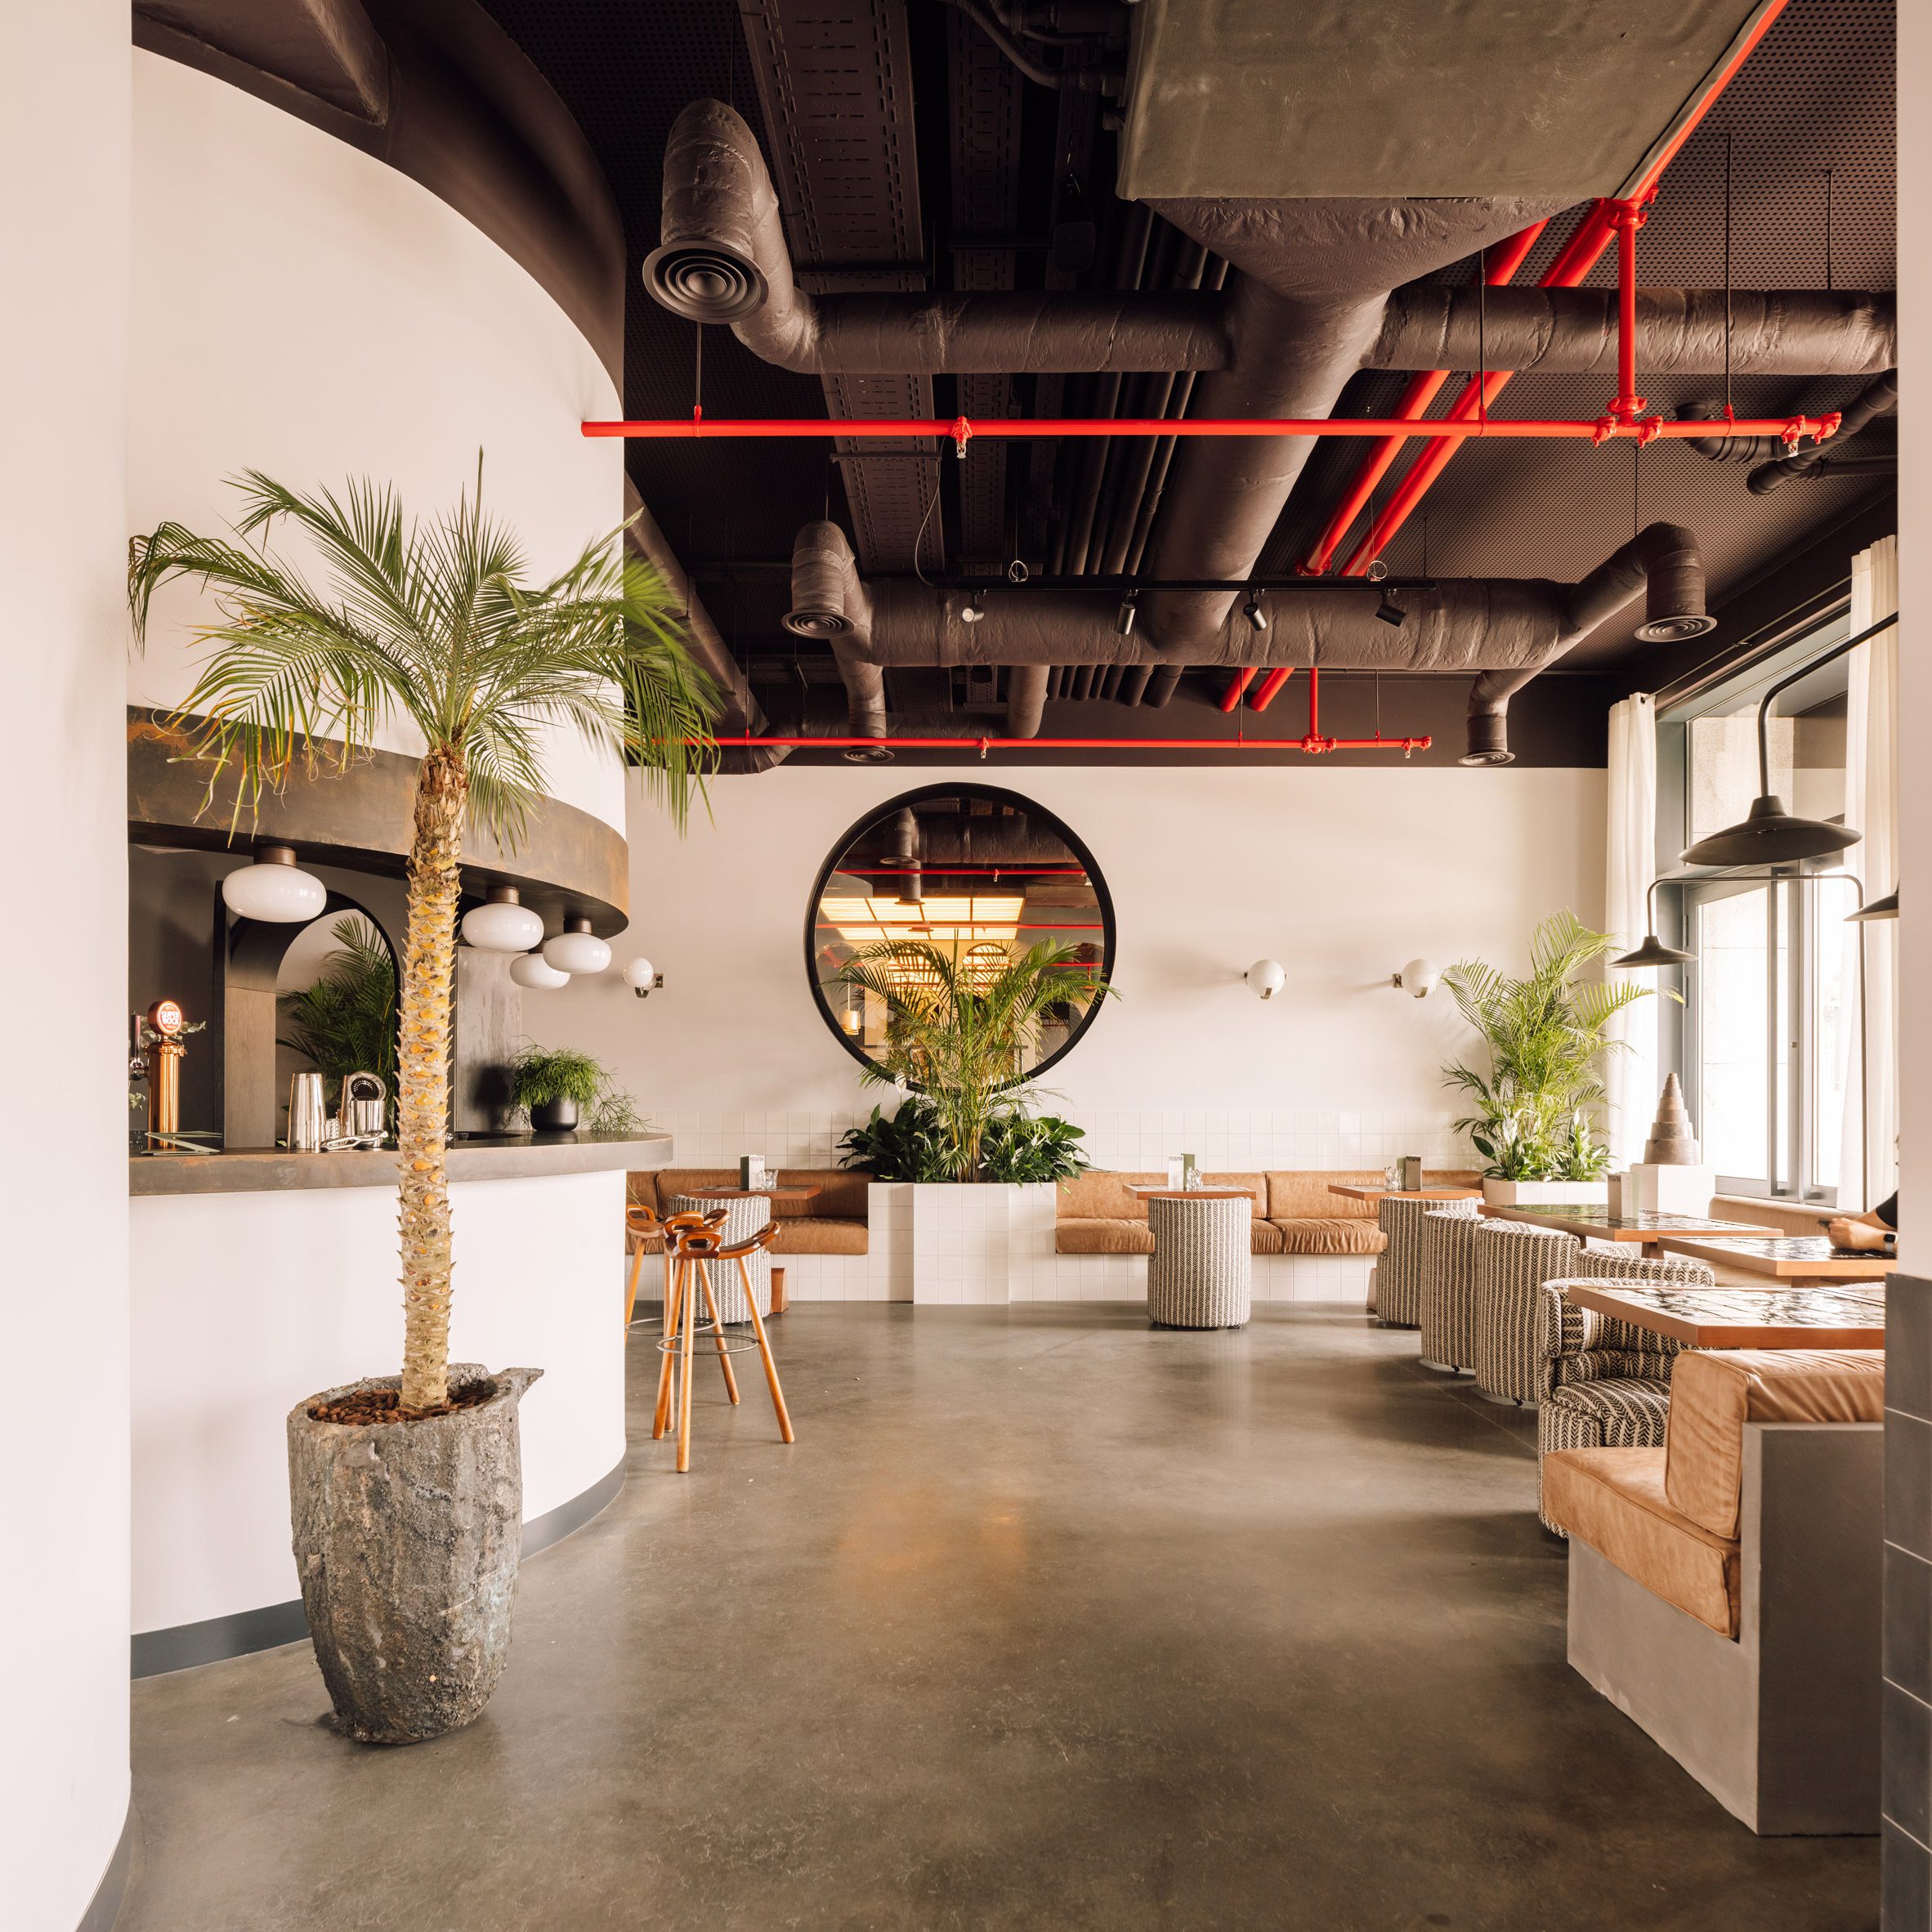 Bar and cafe area with polished concrete floors and exposed ceiling ductwork